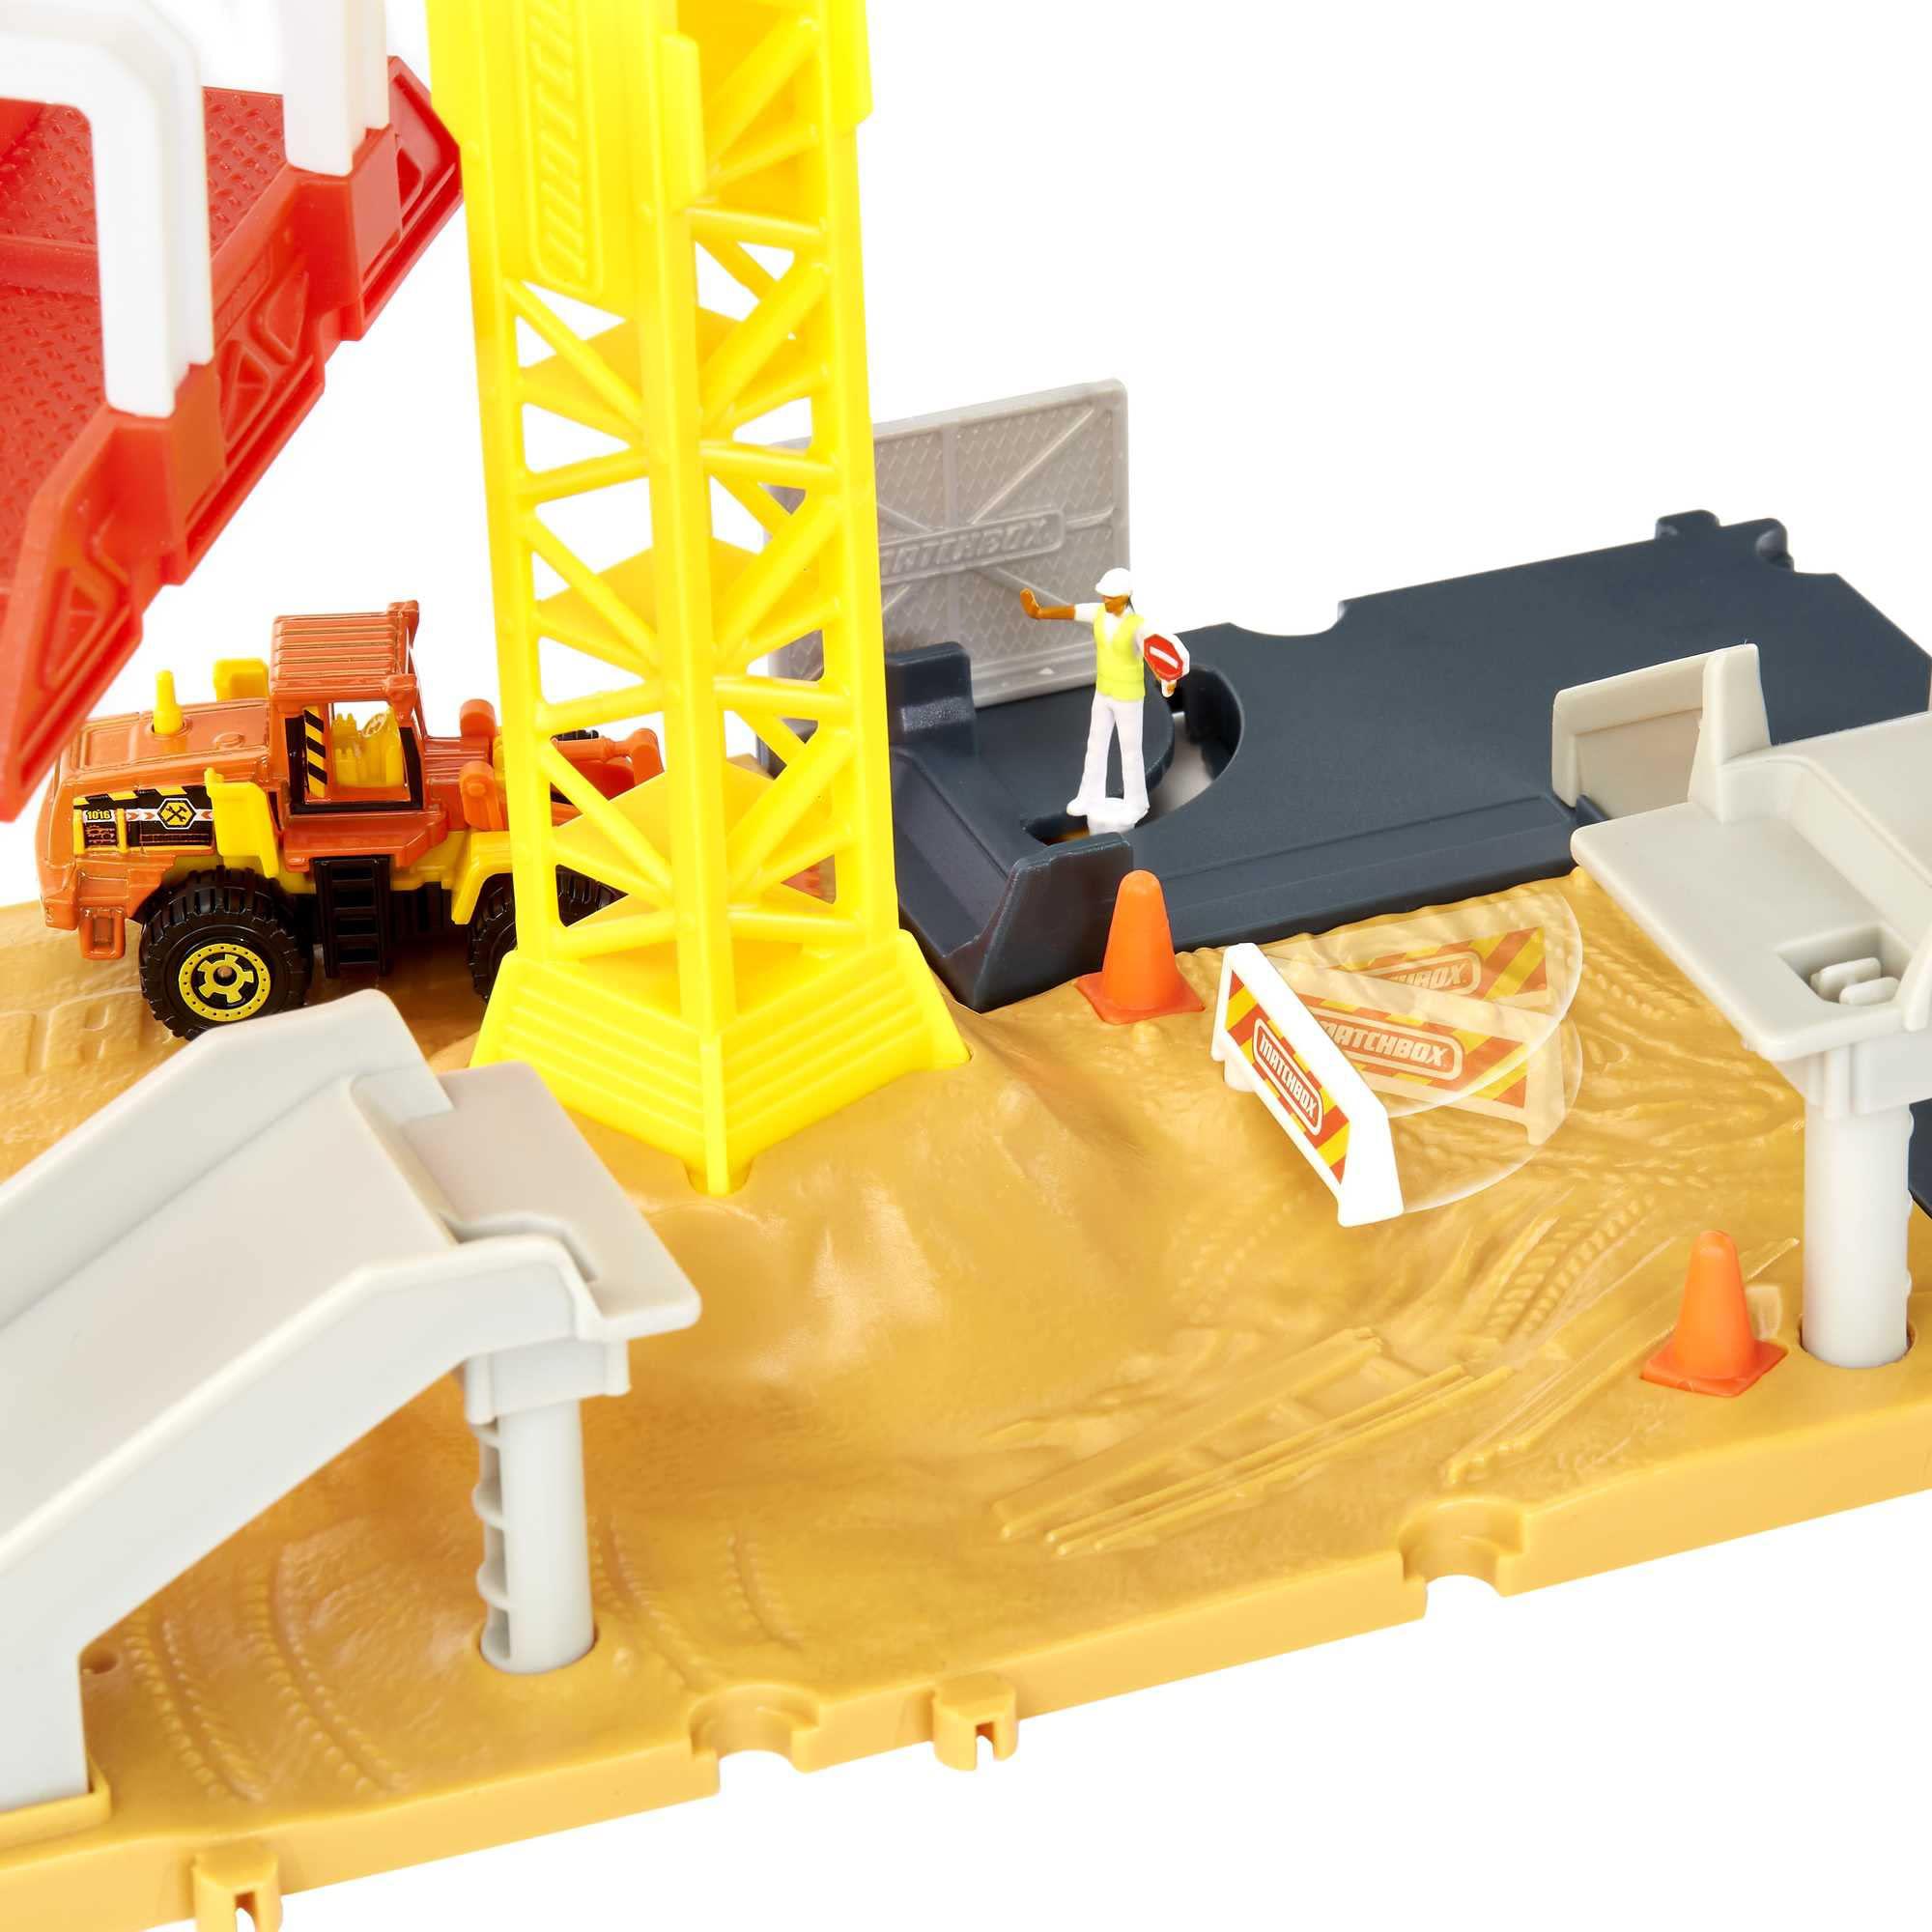 matchbox action drivers construction playset, moving crane, car-activated features, includes 1 matchbox toy bulldozer, for ki